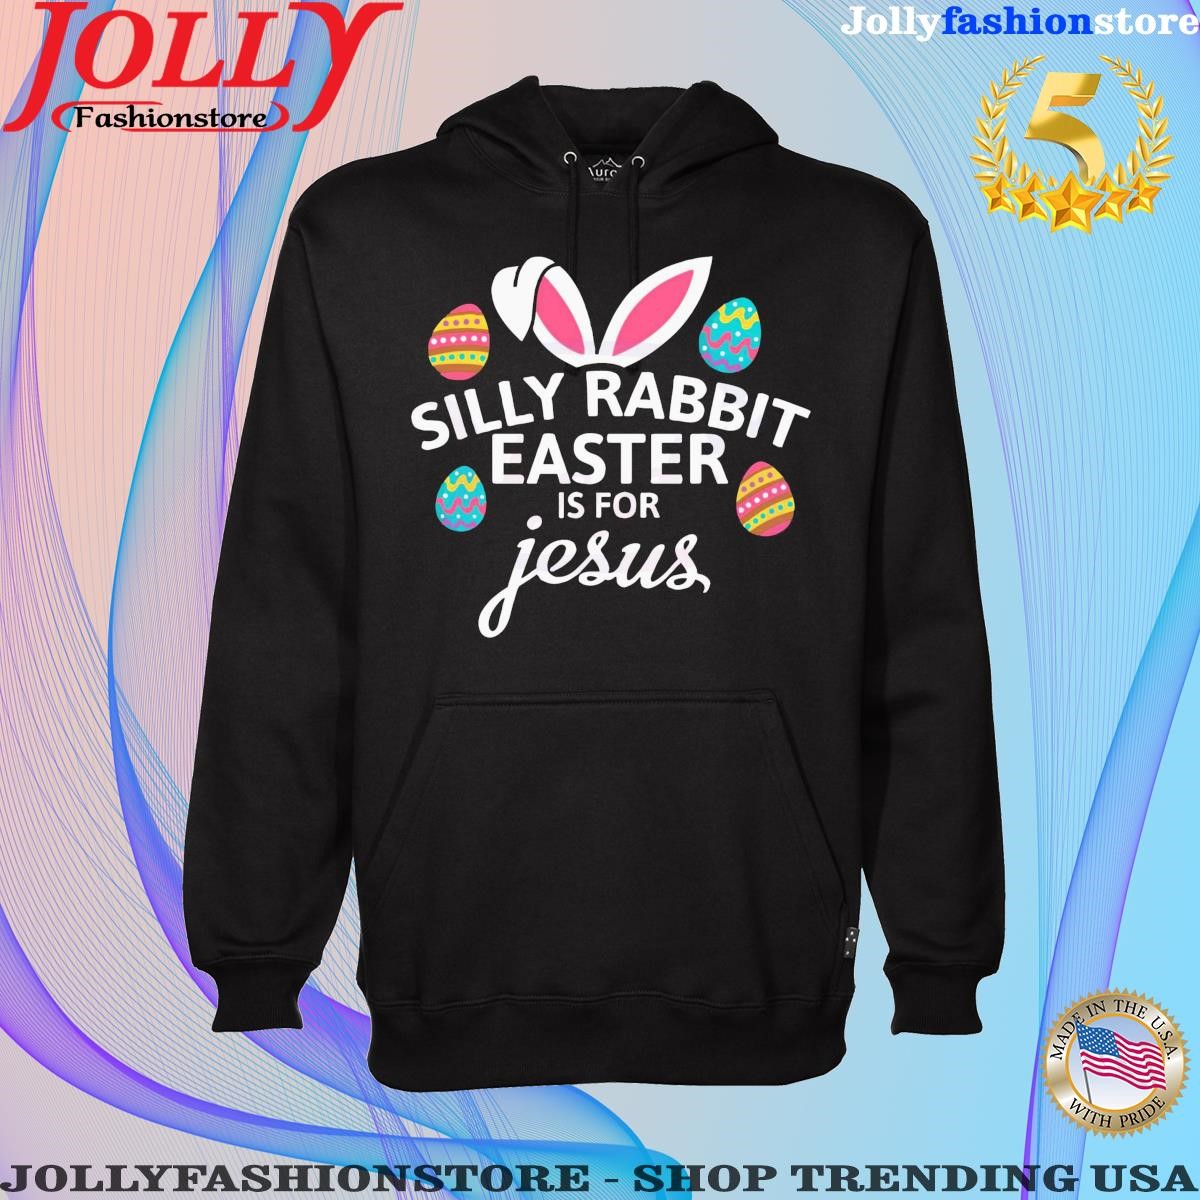 Silly rabbit easter is for Jesus with bunny head shirt Hoodie shirt.png